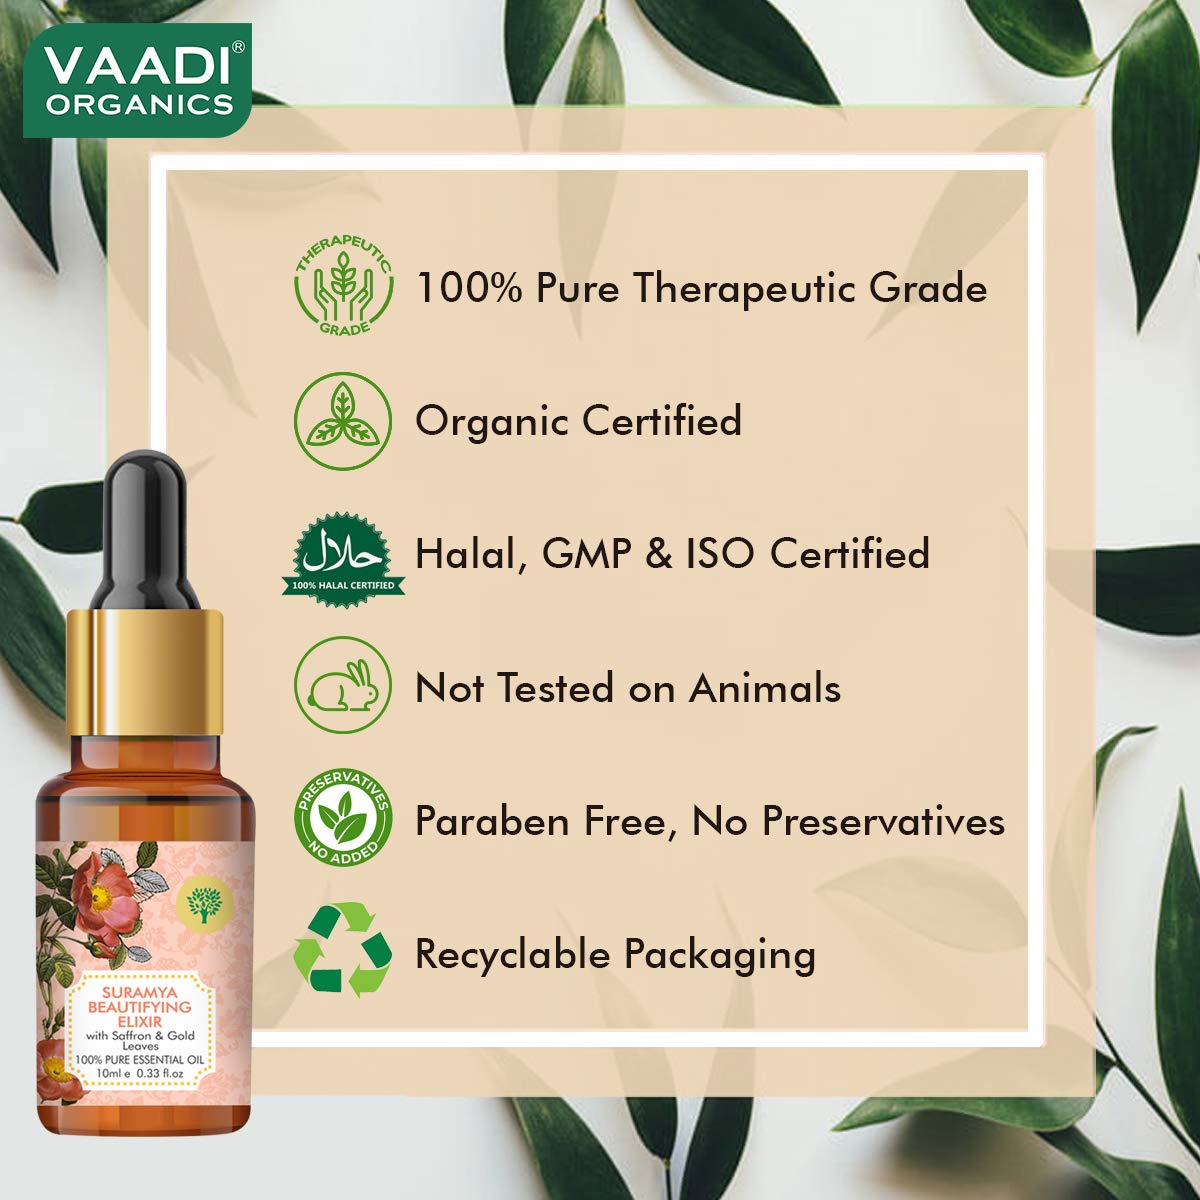 Vaadi Herbals Organic Suramya Beautifying Elixr (Pure Mix of Saffron, 24k Gold Leaves & Sweet Almond Oil) - Reduces Fine Lines, Improves Skin Complexion & Gives a Natural Glow, 10 ml